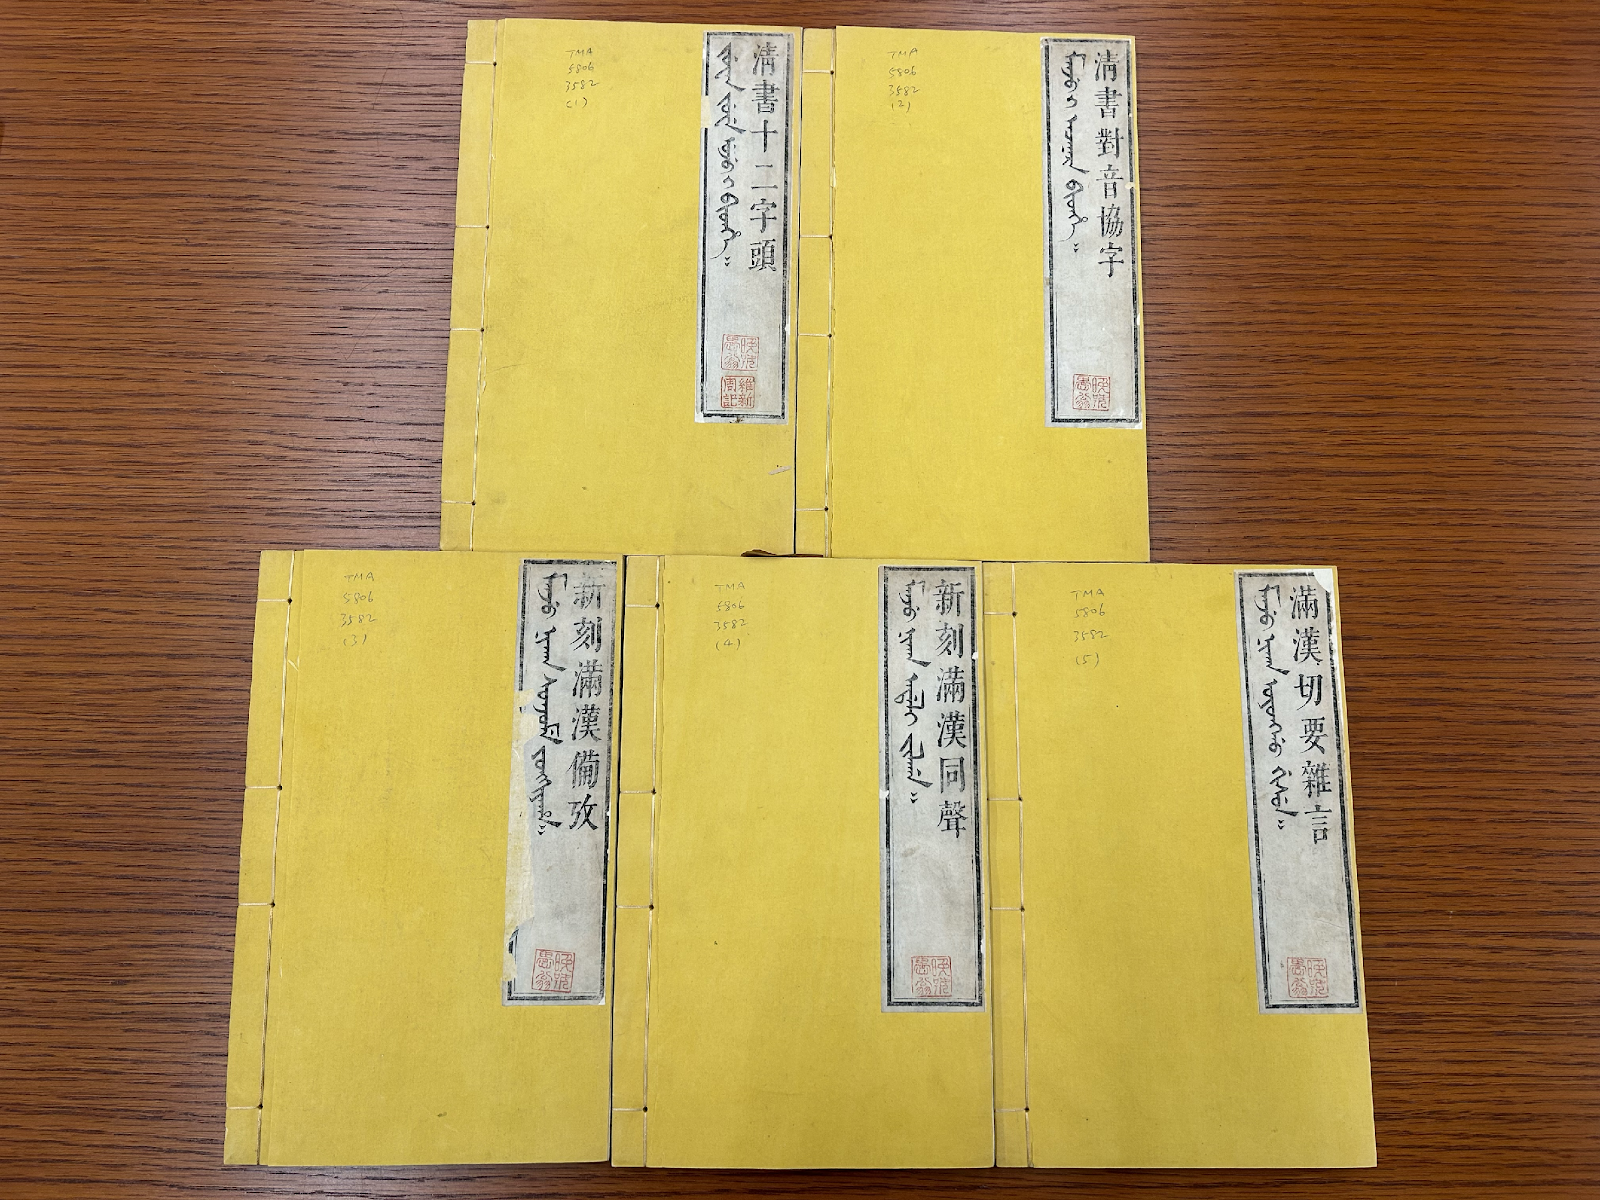 A group of yellow folders on a wood surface<br><br>Description automatically generated